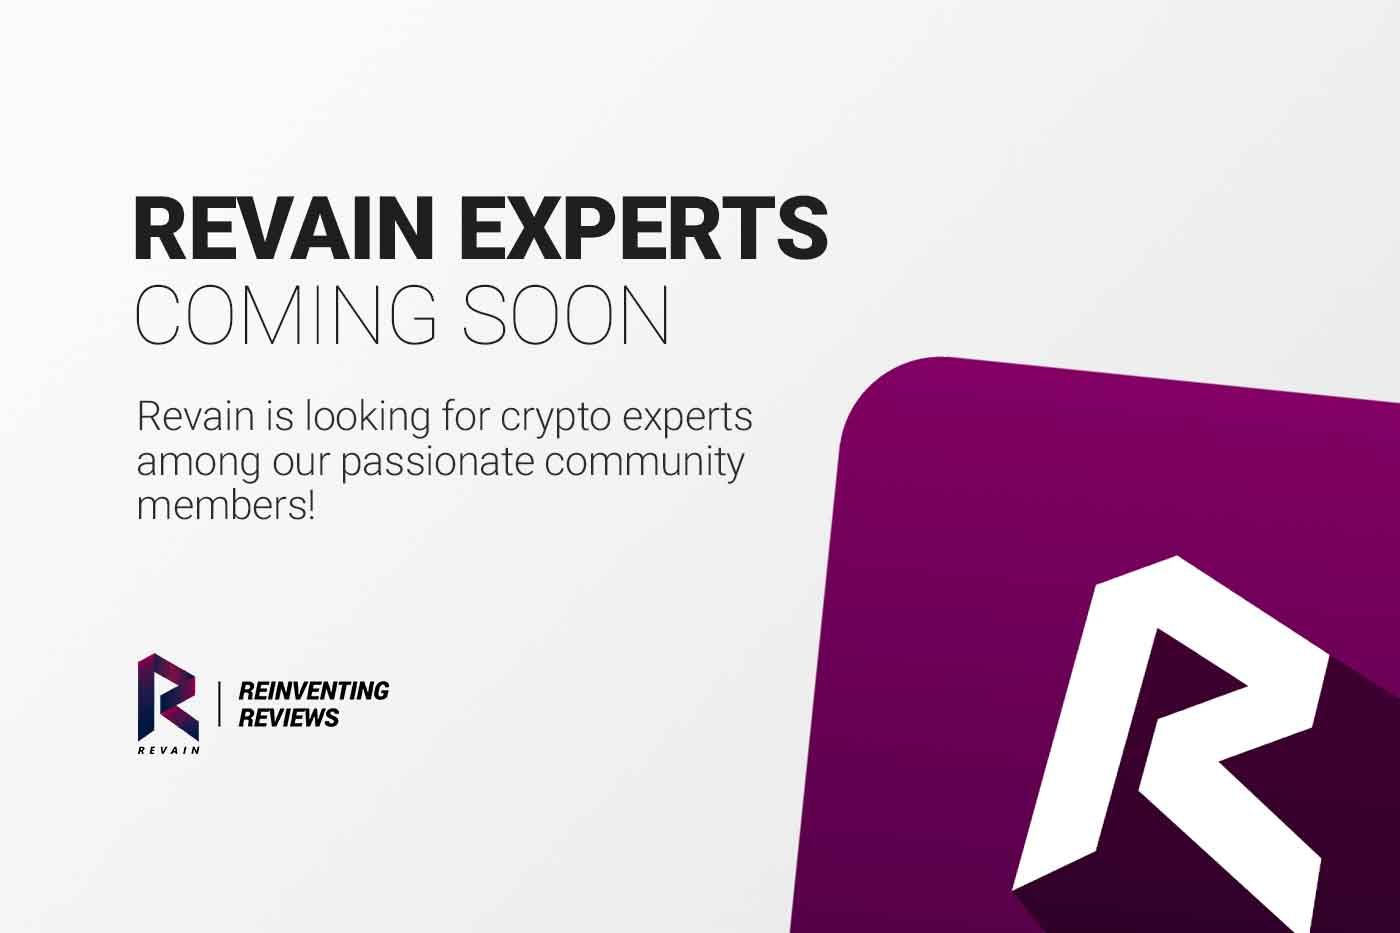 Revain is looking for Crypto Experts among our most passionate community members